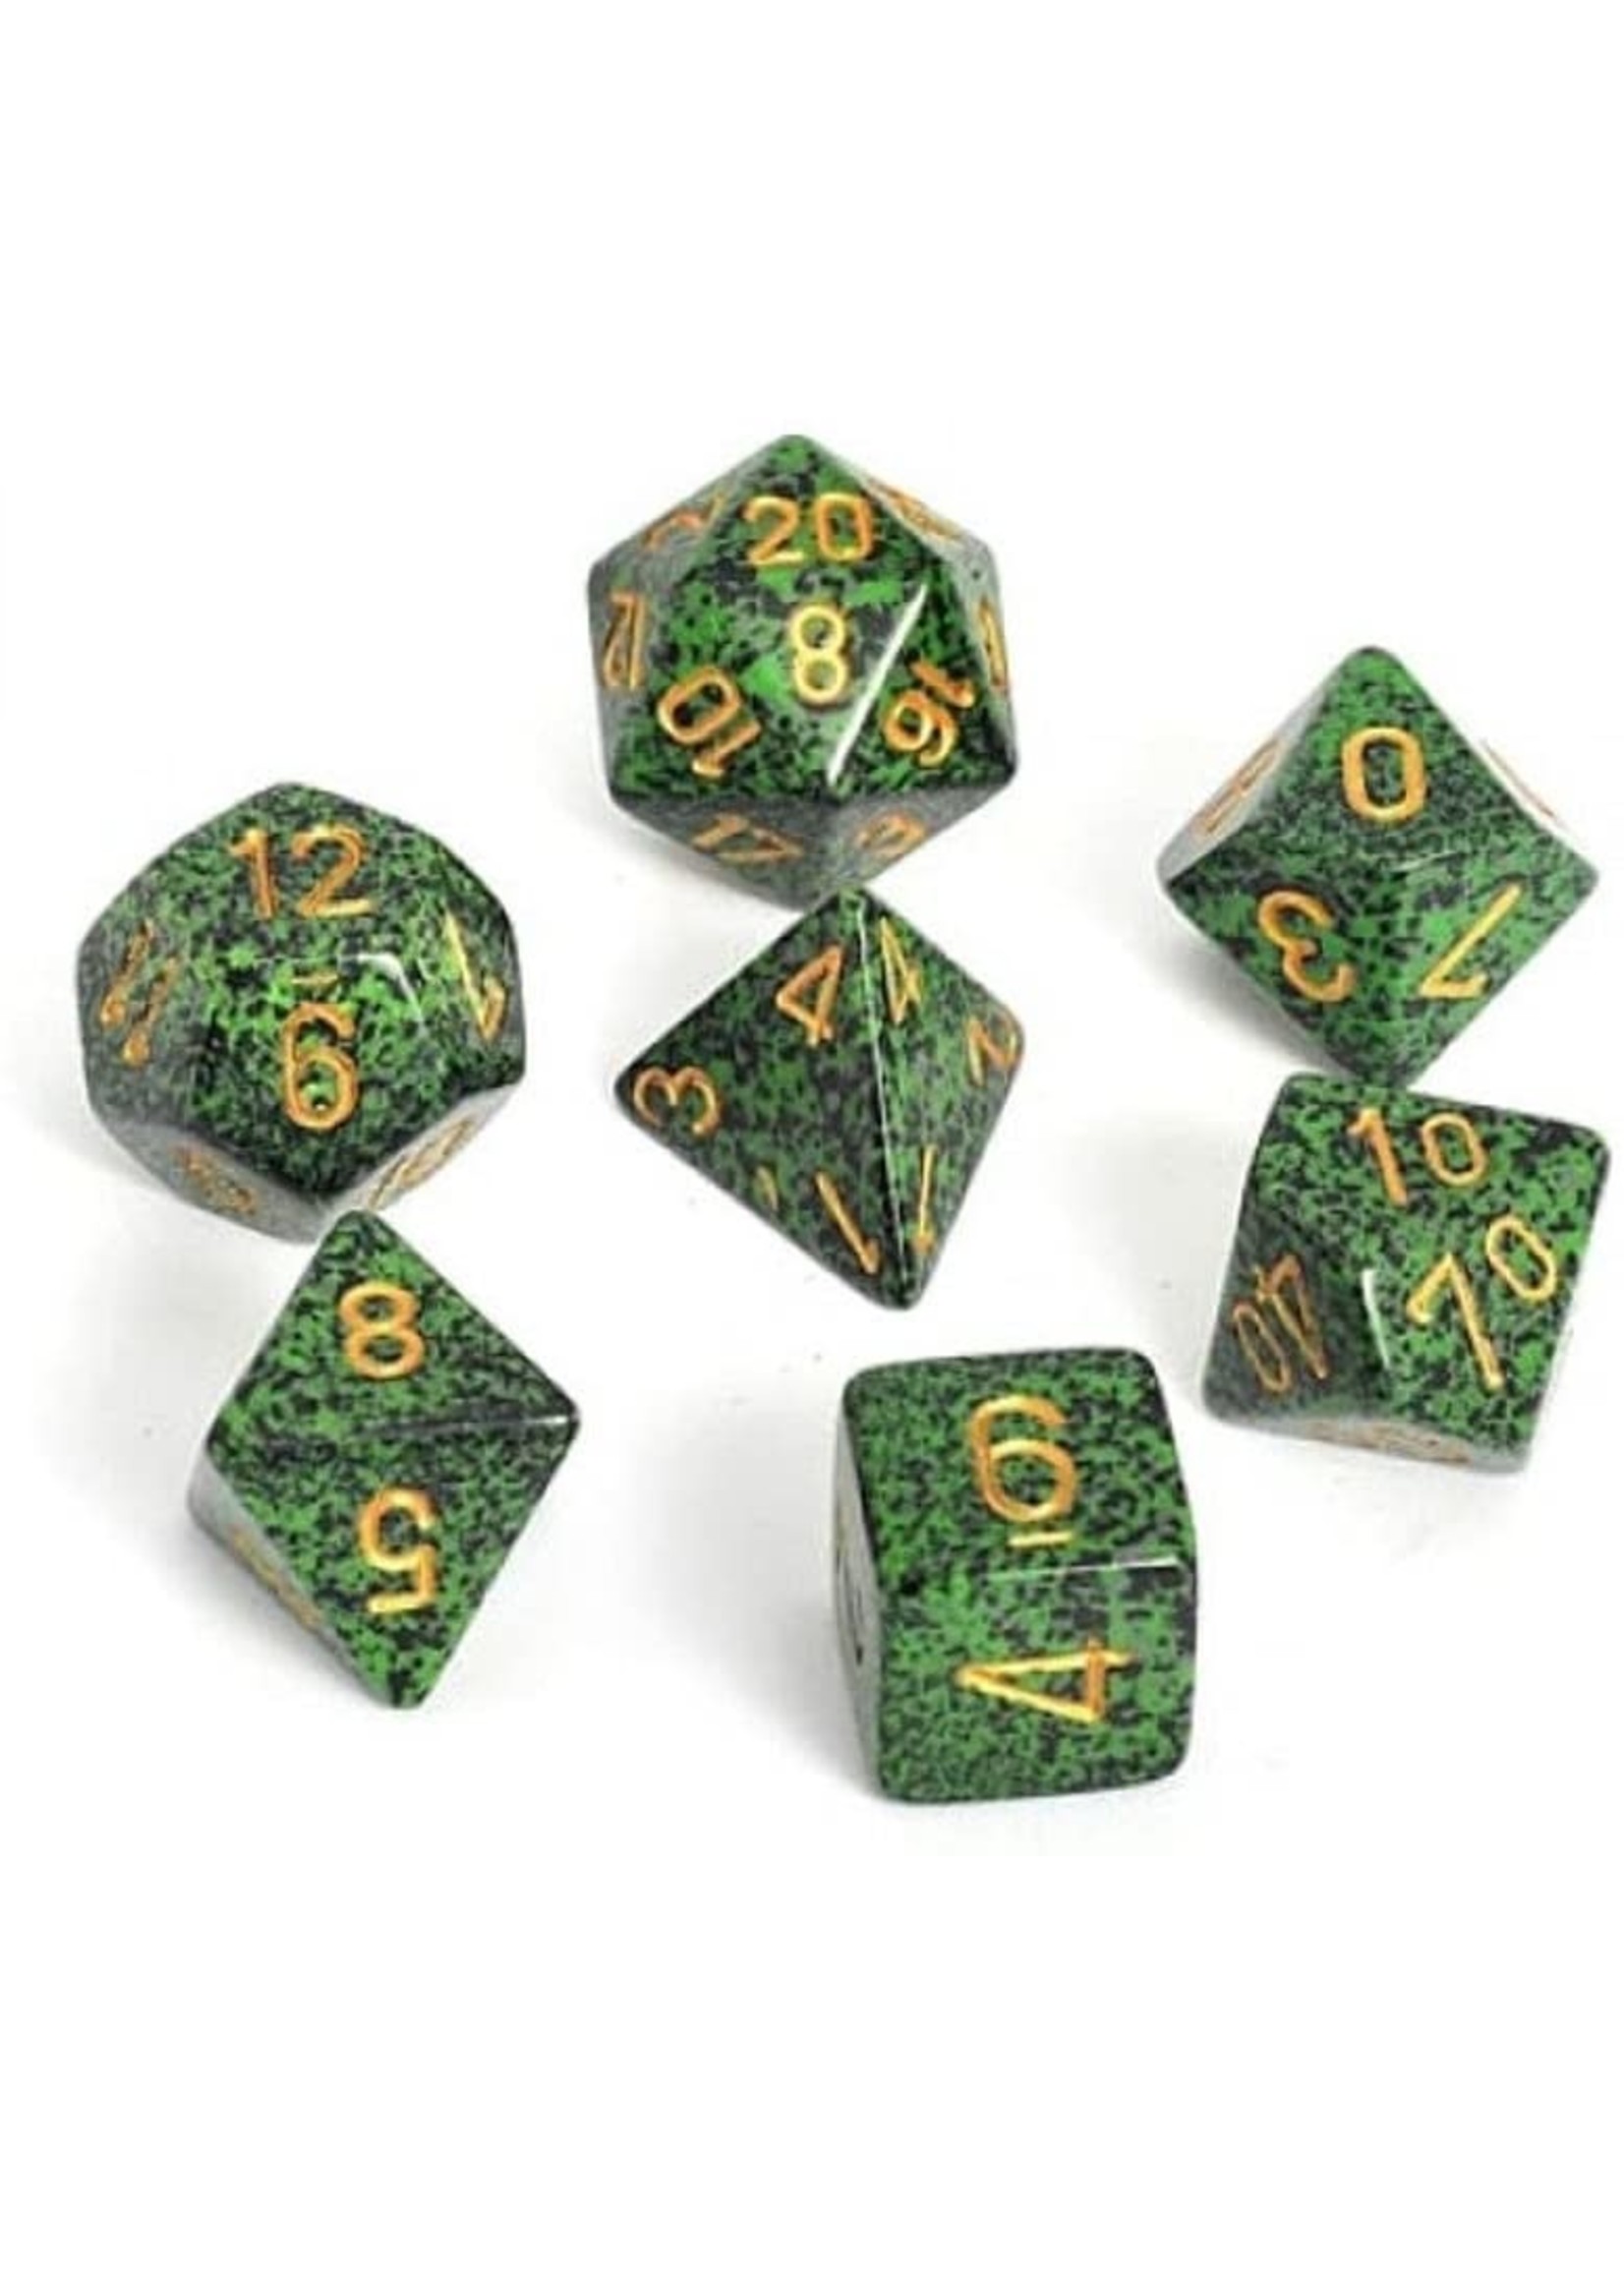 CHX25335 Chessex Chessex Speckled Golden Recon Cubo Set Boxed 